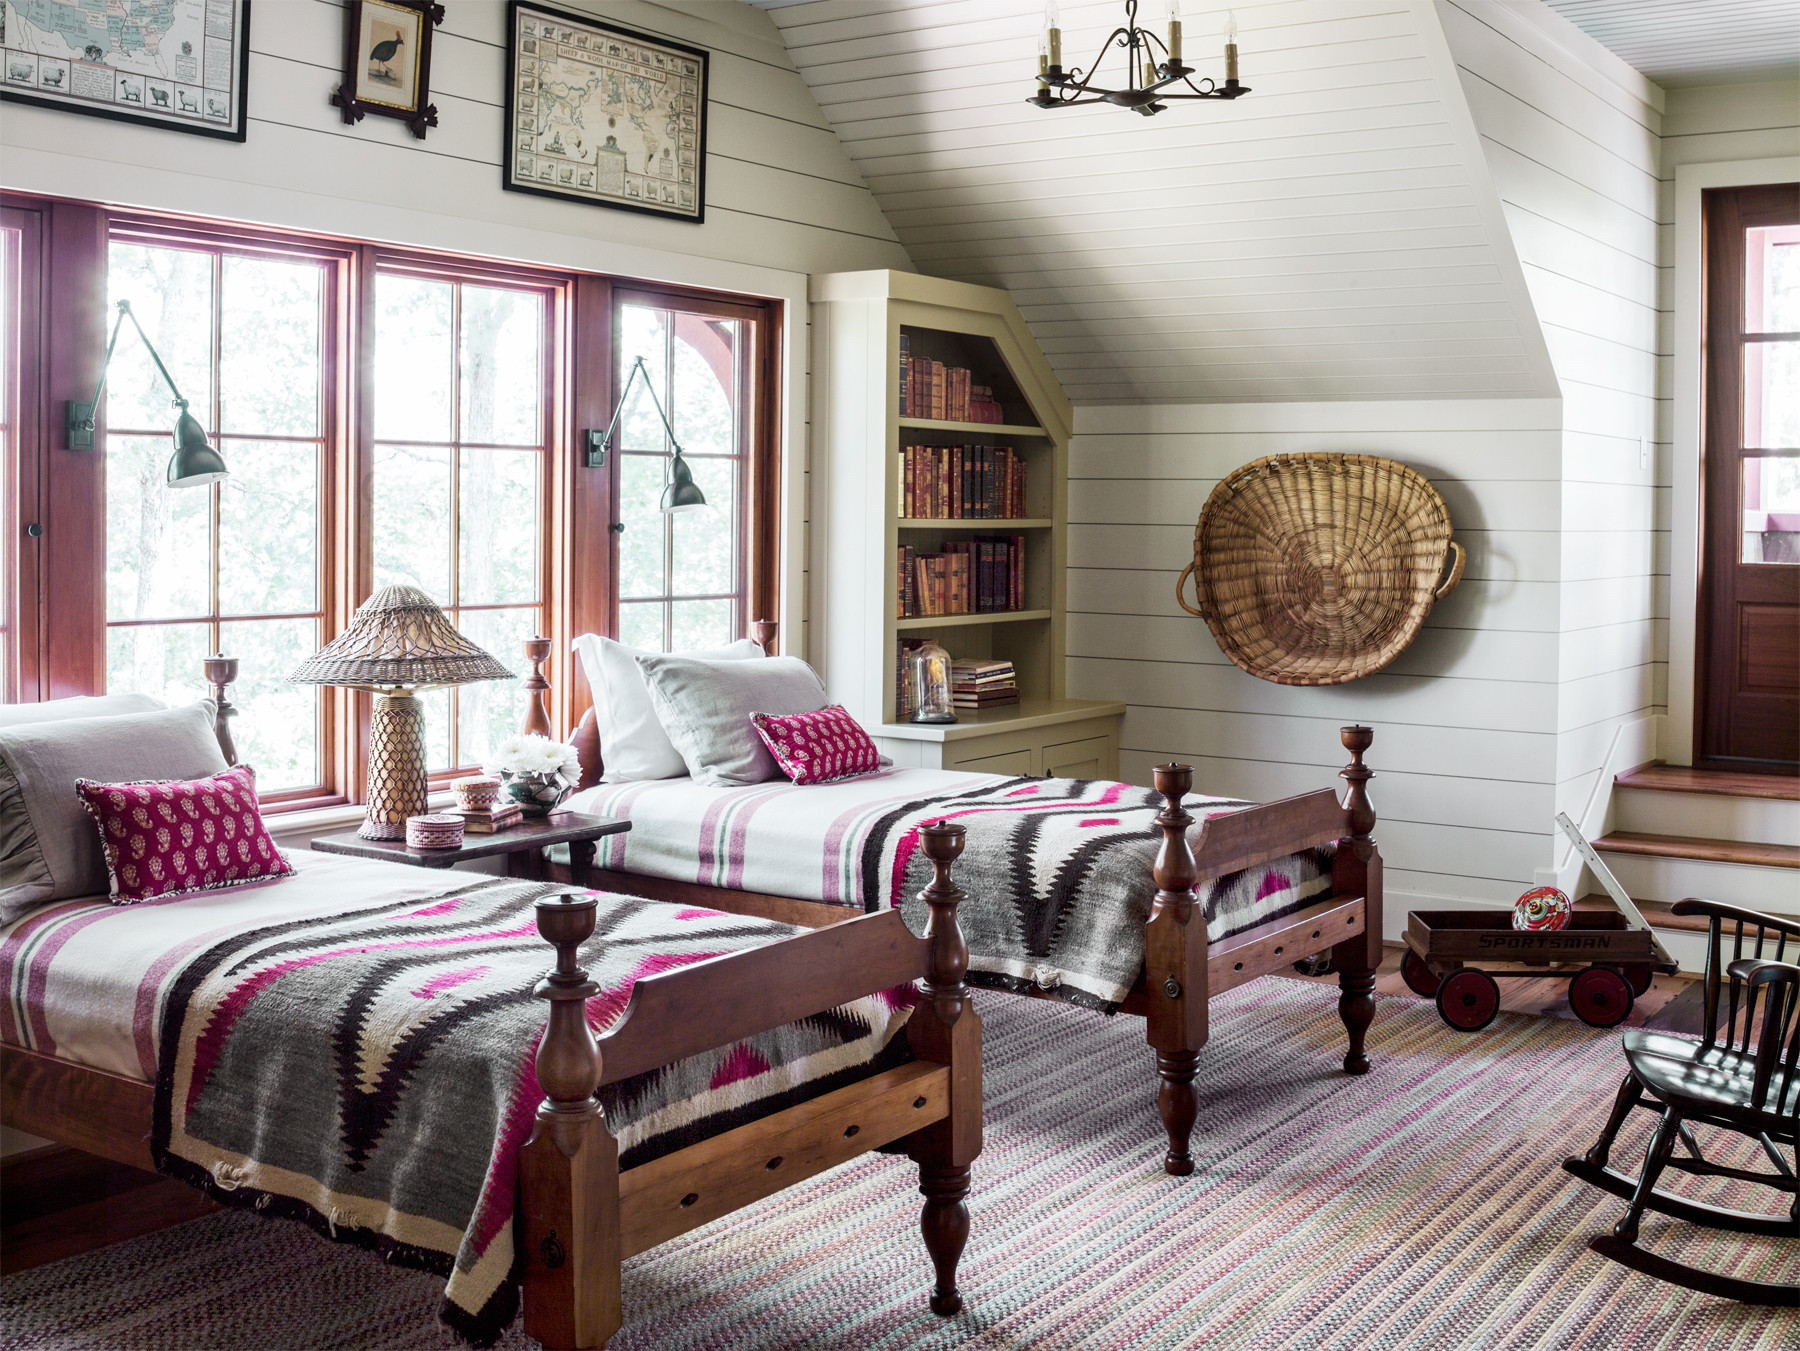 Rustic Country Bedroom
 South Carolina Lake House Cabin Rustic and Timeless